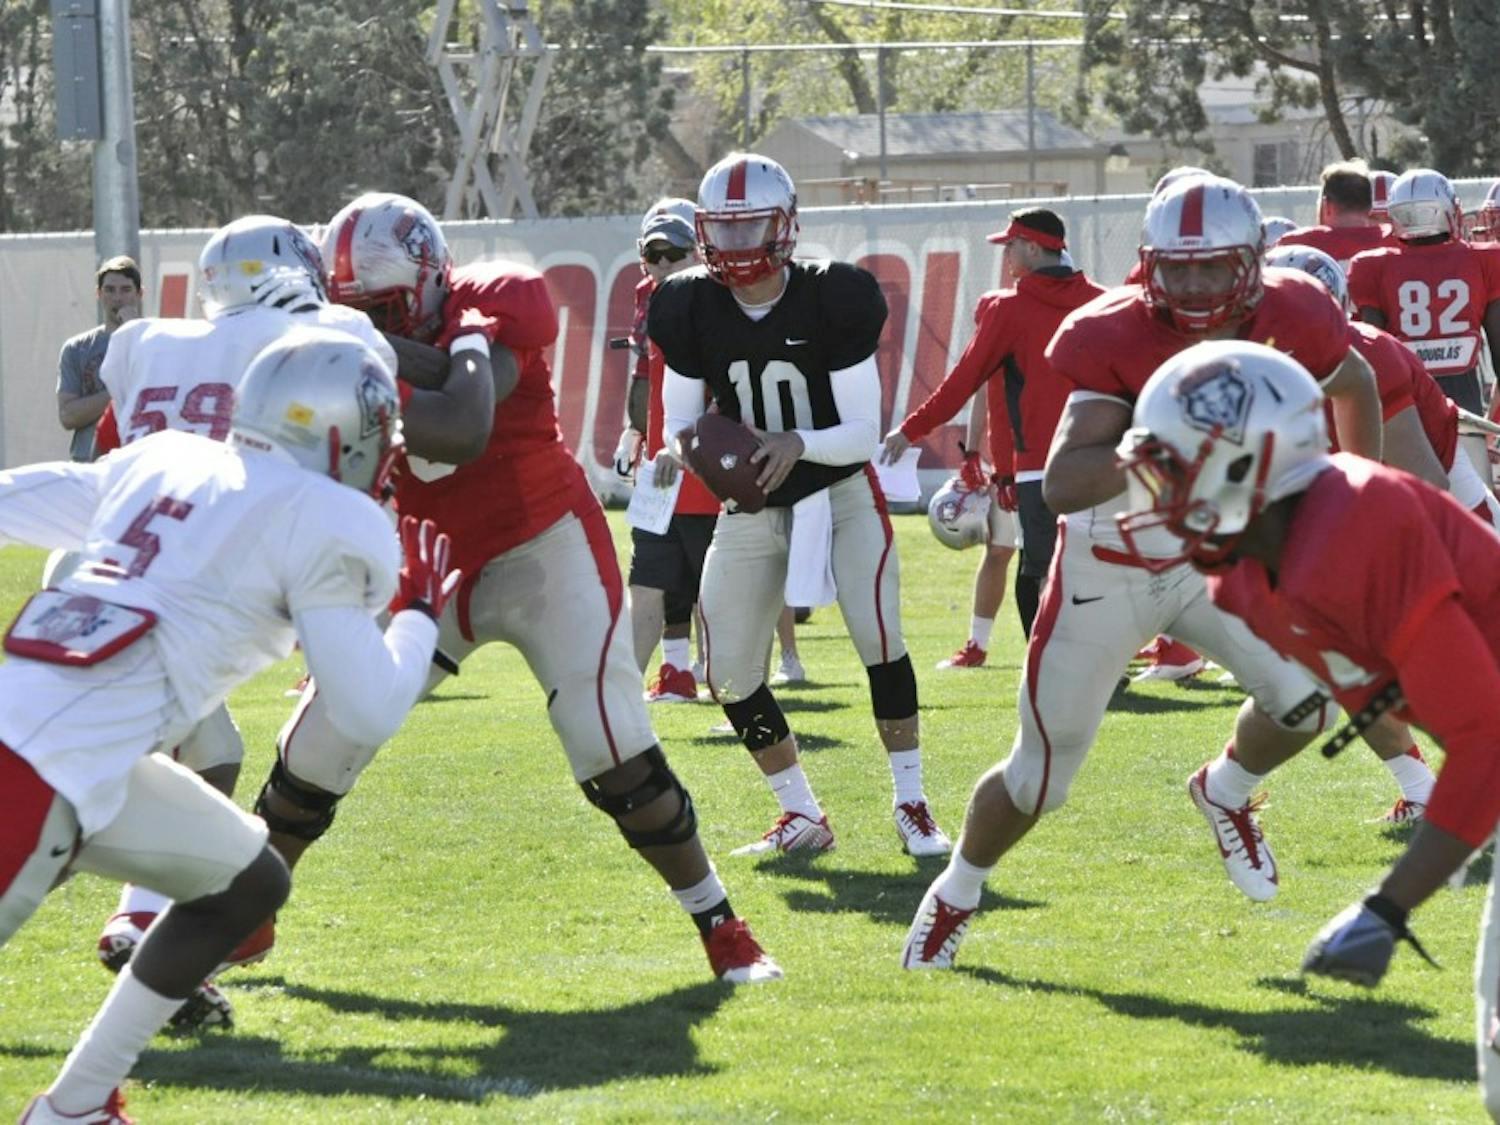 Quarterback Austin Apodaca takes a snap during spring football practice at the Tow Diehm Complex on March 27. Apodaca turned down an invitation to visit UNM for a recruiting trip out because of a commitment to Washington State. He later transferred to a junior college and now has joined the Lobos. For more, see Page 16.